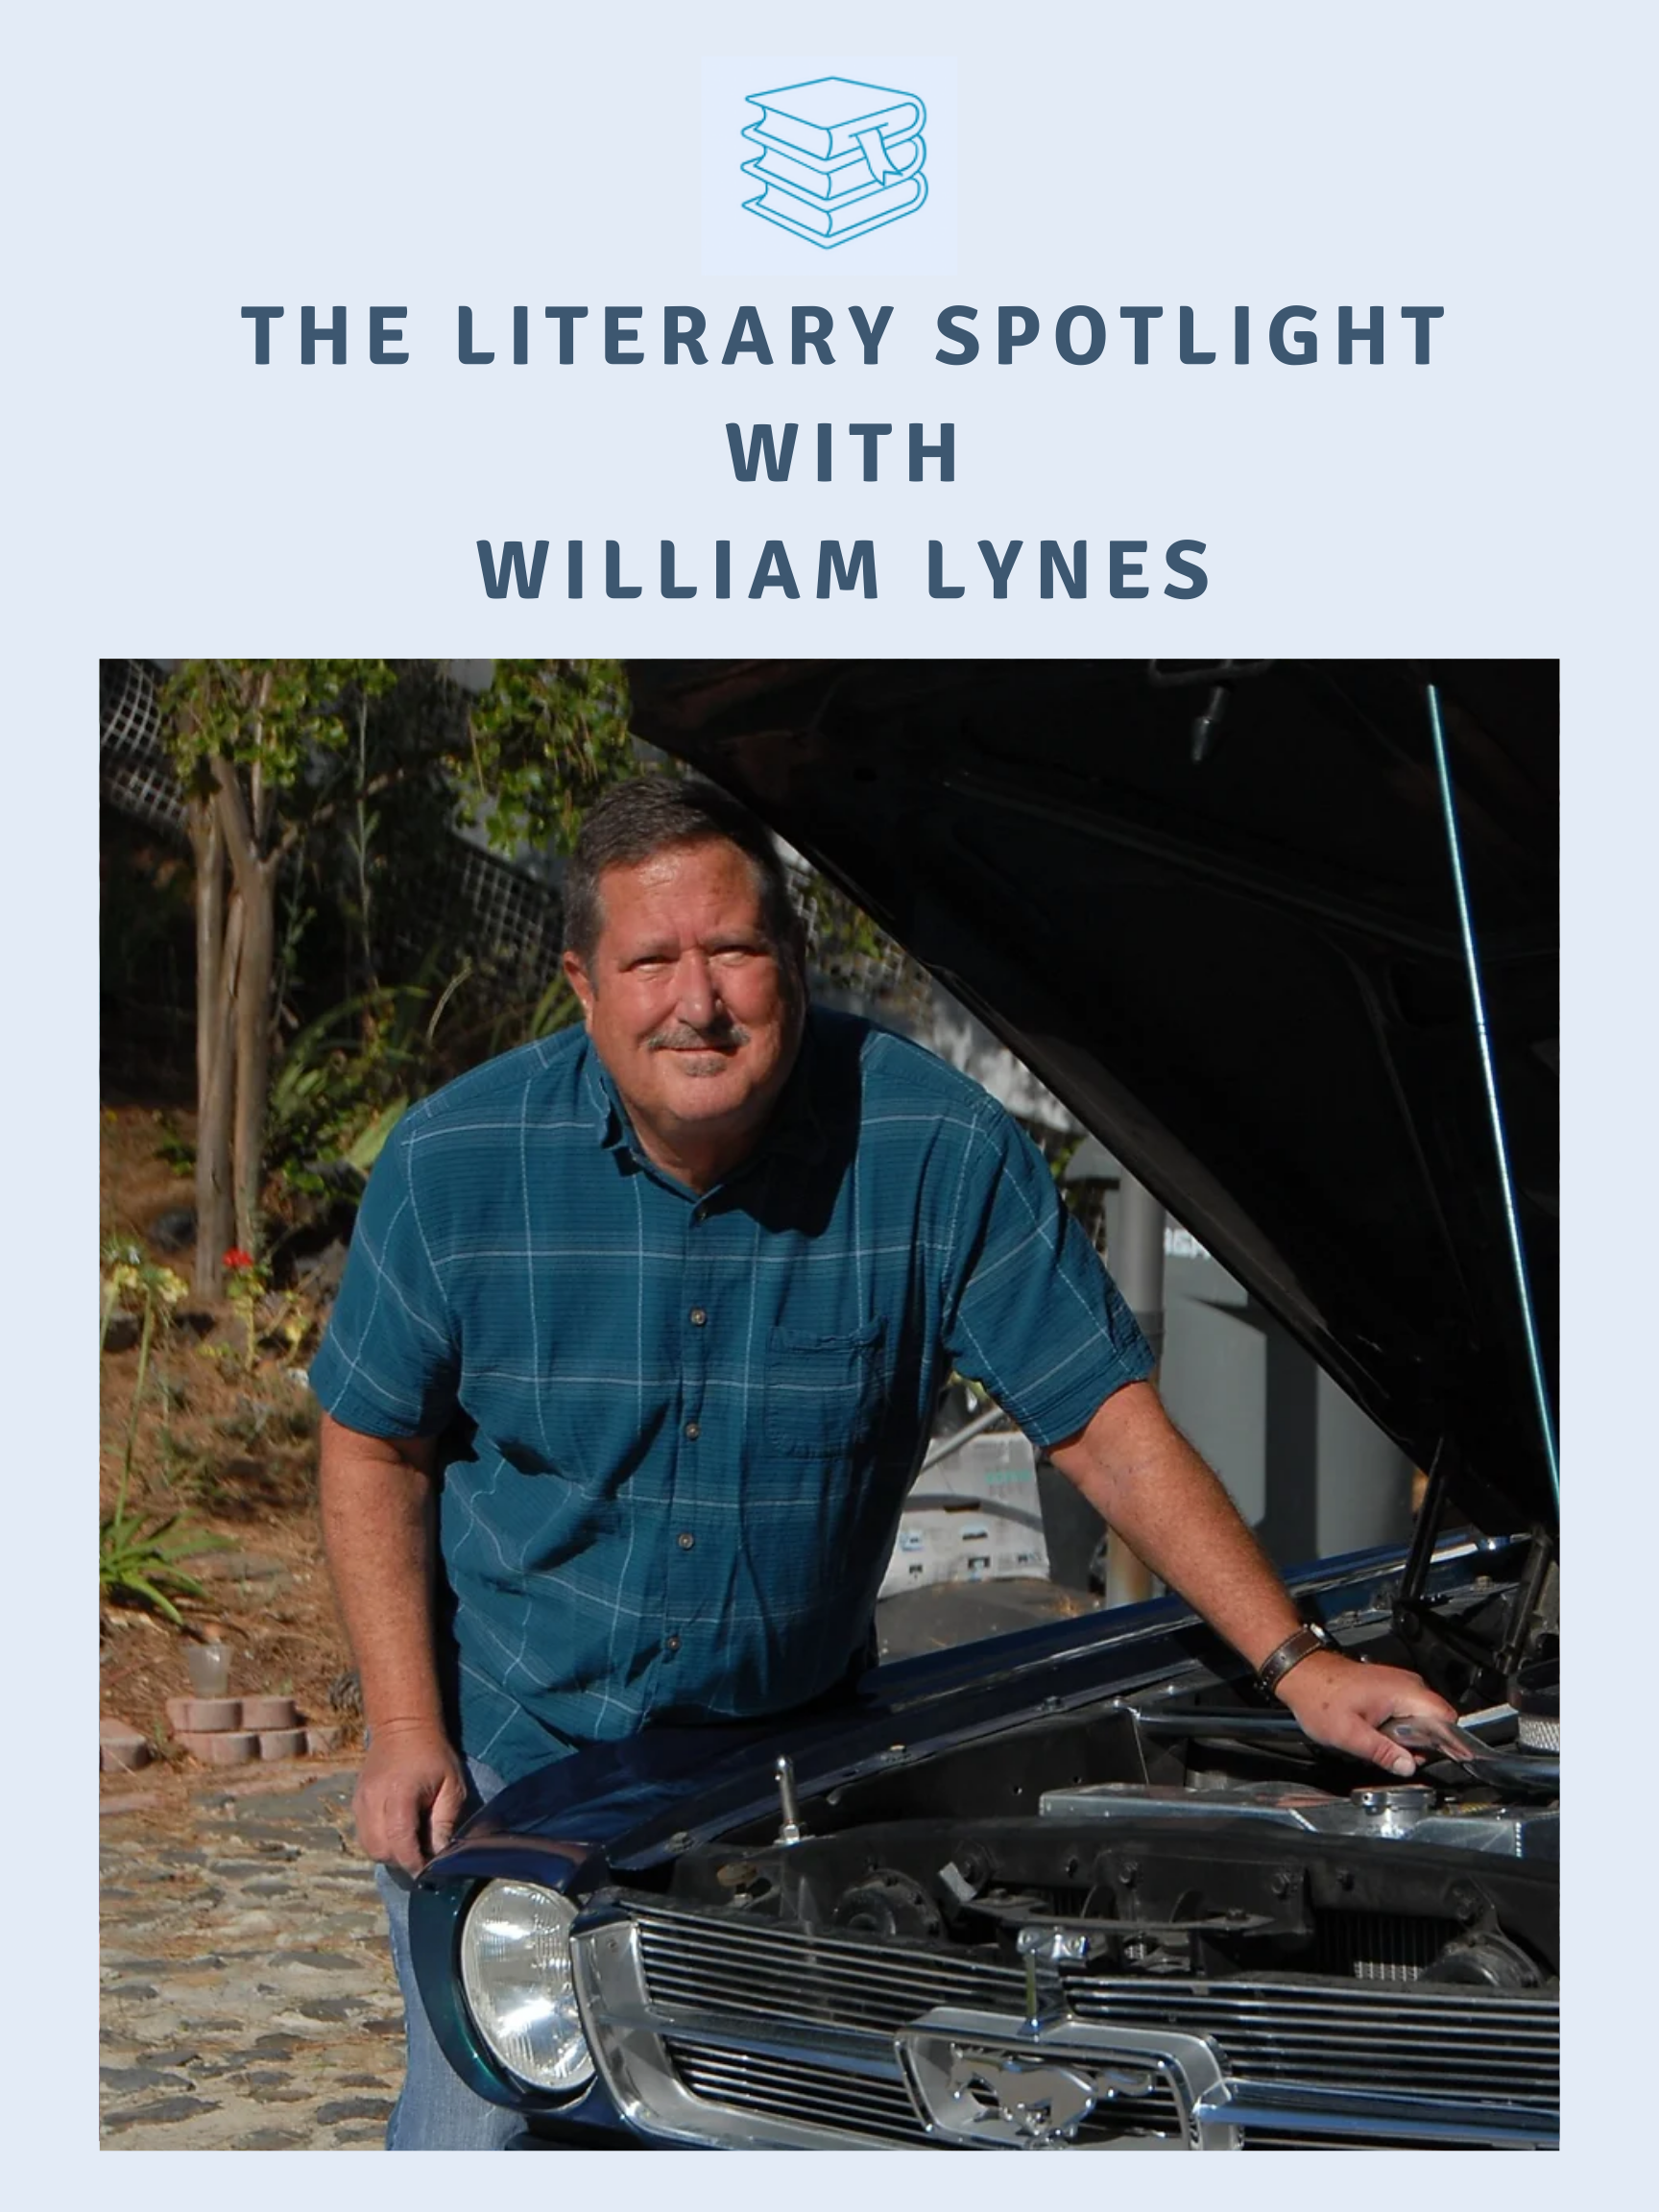 AUTHOR INTERVIEW: THE LITERARY SPOTLIGHT WITH AUTHOR WILLIAM LYNES